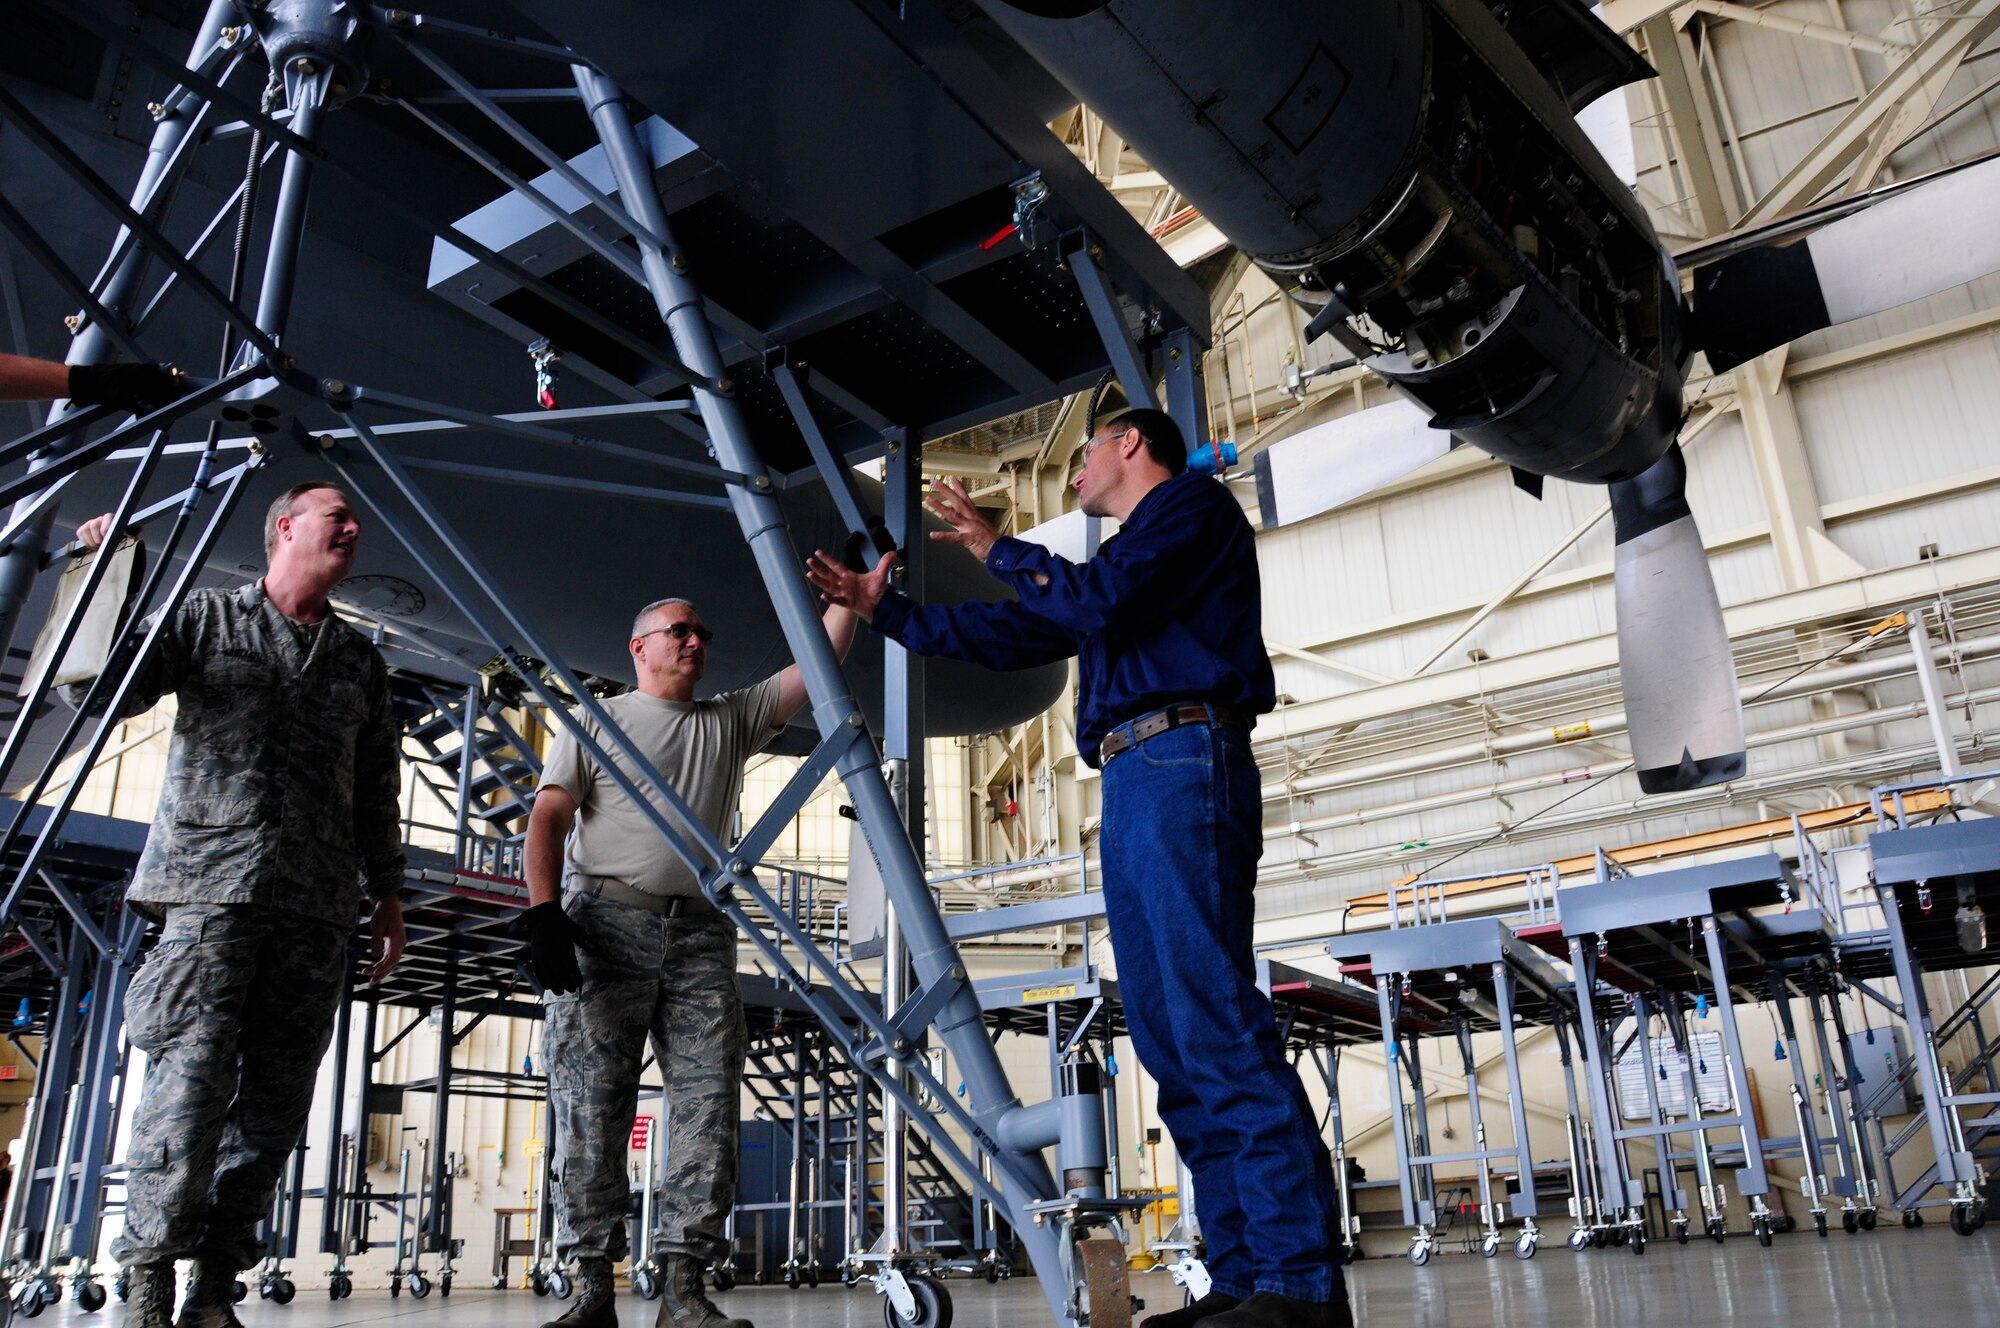 U.S. Air Force Senior Master Sgt. Christopher Mueller, 145th Maintenance Squadron (MXS) Aircraft Inspection Superintendent, Master Sgt. Kevin Mignosa, 145th MXS, ISO Dock leader and a representative from Flexible Lifeline Systems, discuss the placement of a wing jack stand during installation of new Isochronal Inspection (ISO) Aircraft Maintenance Platforms at the North Carolina Air National Guard base, Charlotte Douglas International Airport, June 2, 2015. (U.S. Air National Guard photo by Master Sgt. Patricia F. Moran, 145th Public Affairs/Released)